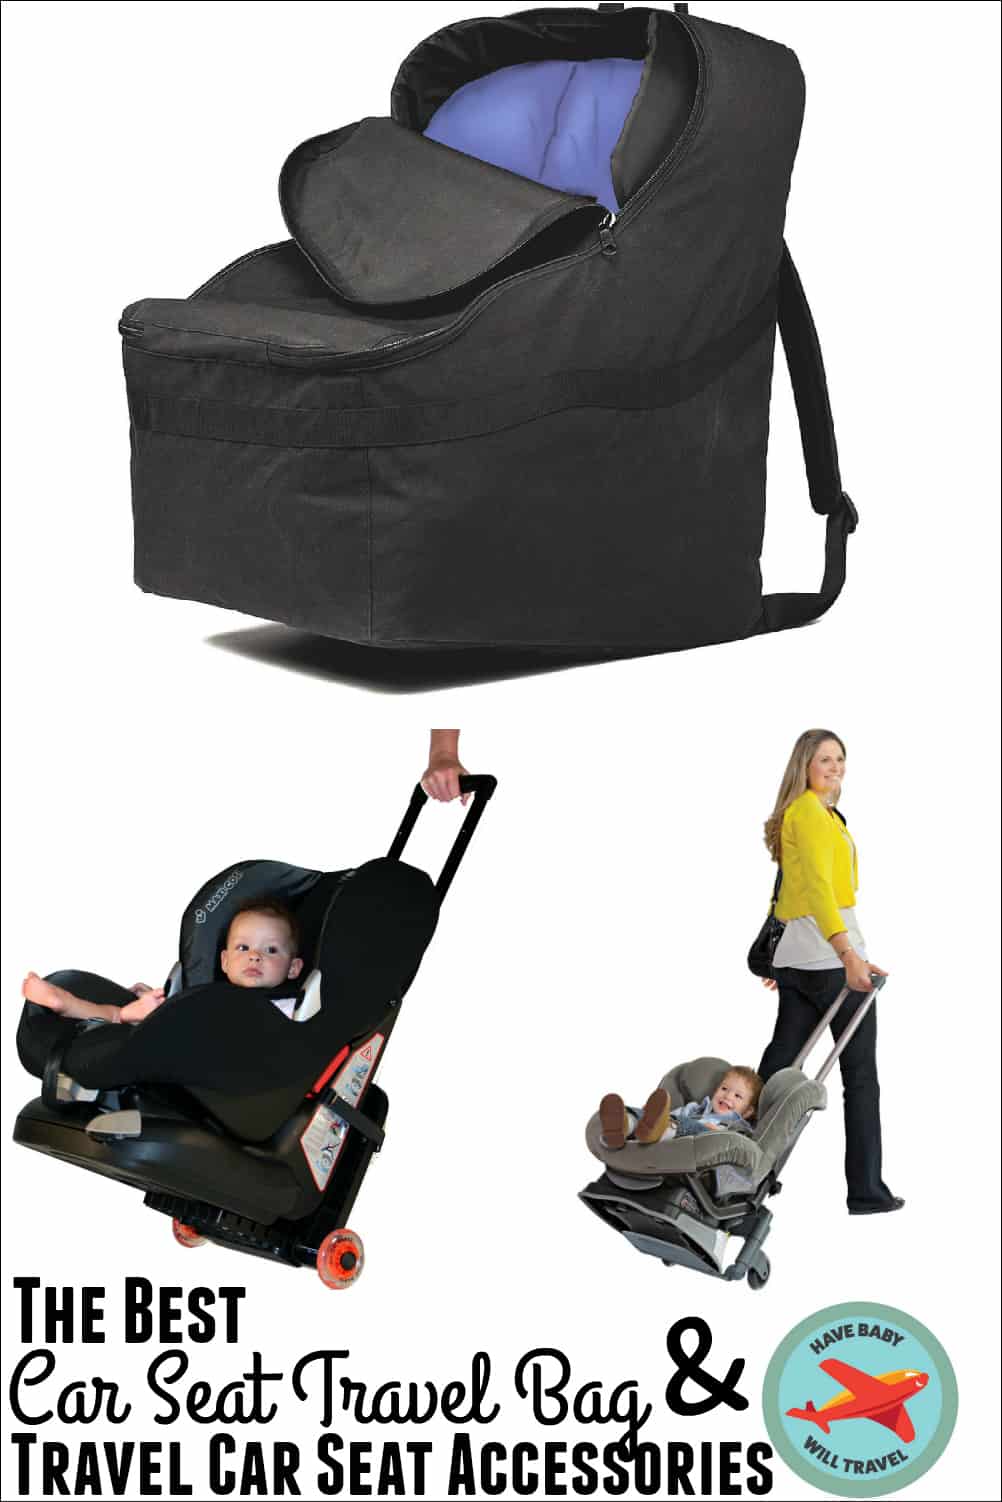 Brand new in pack Babystyle stroller and car seat travel bag in black 